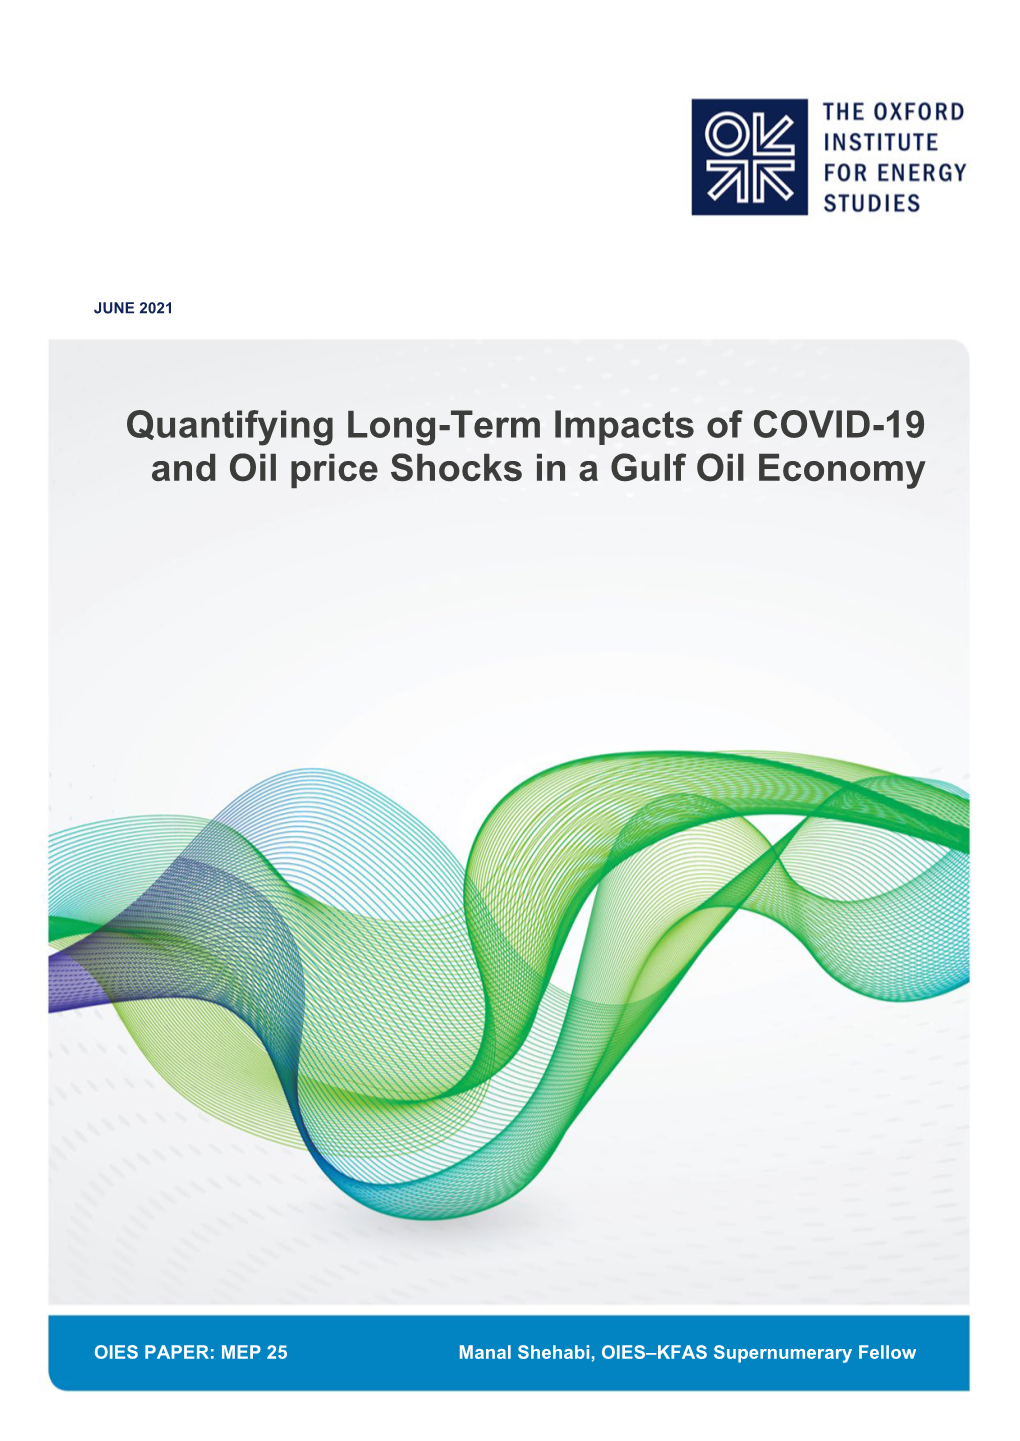 Quantifying Long-Term Impacts of COVID-19 and Oil Price Shocks in a Gulf Oil Economy